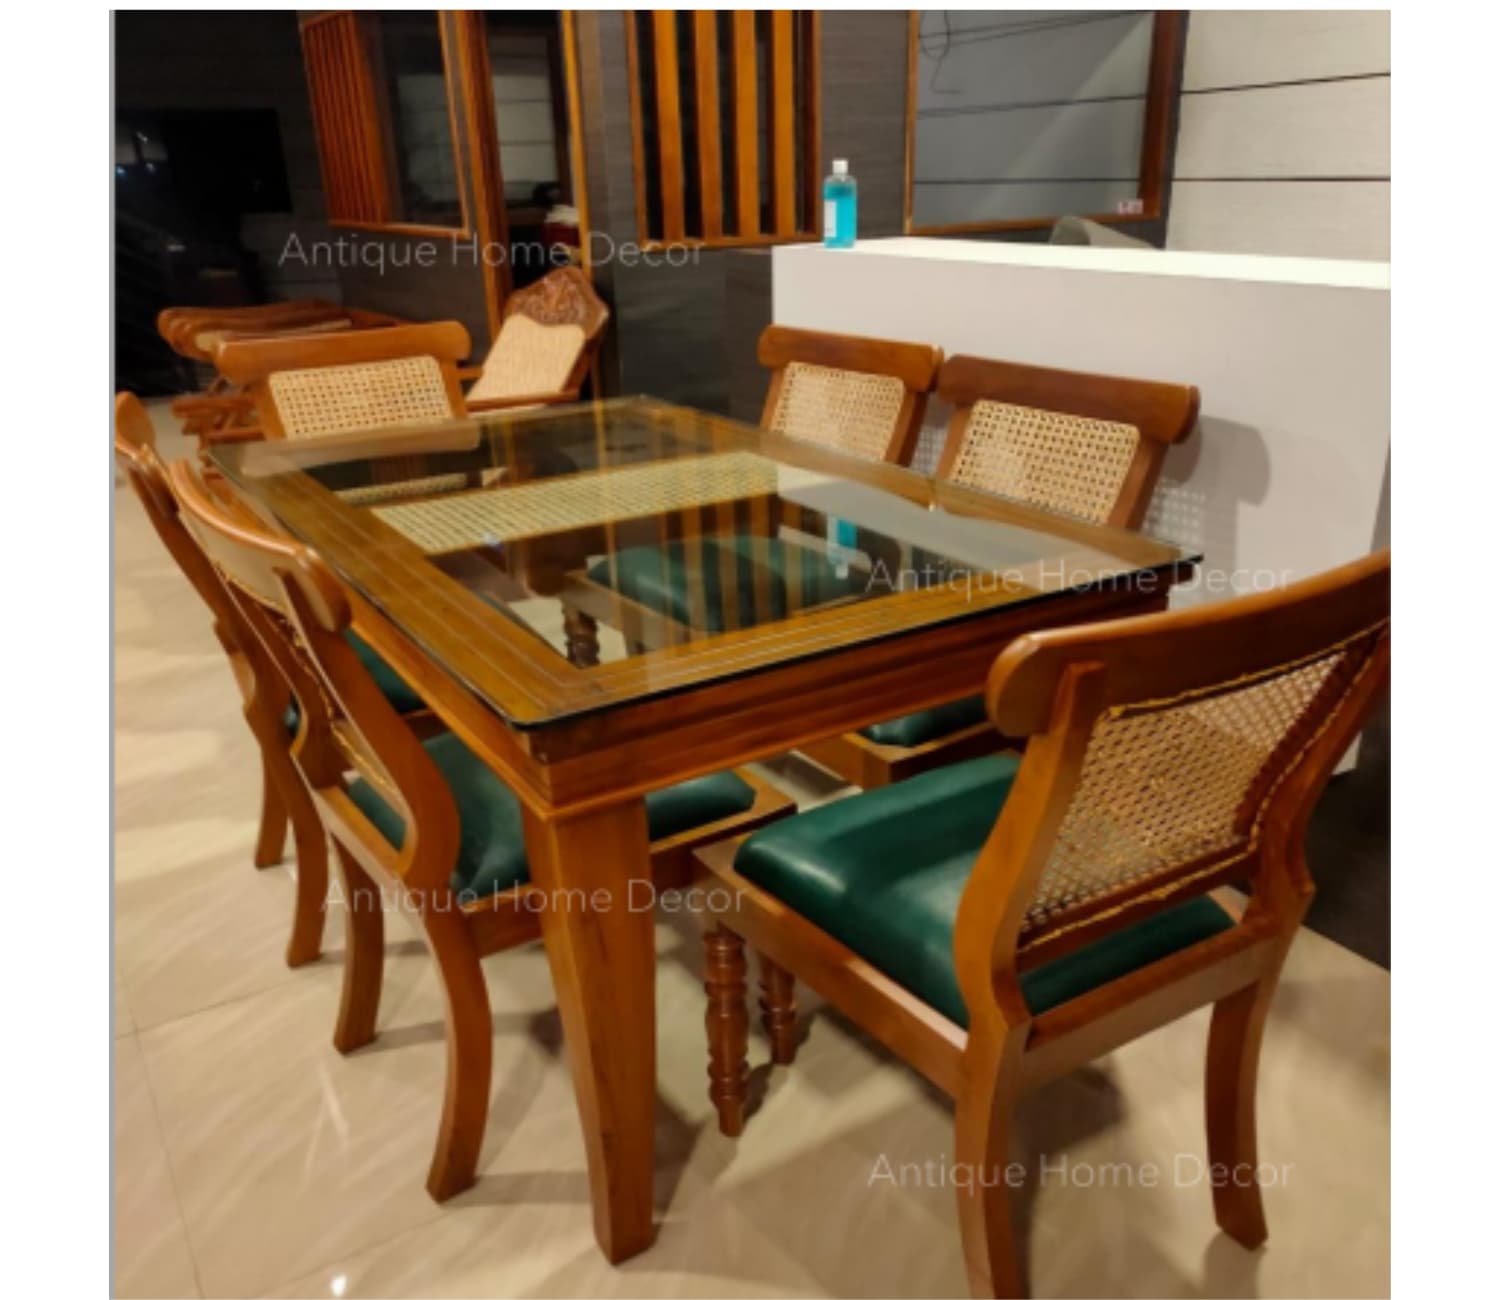 Amaze Plain Glass Top With Central Cane Work Dining Table In Teak Wood